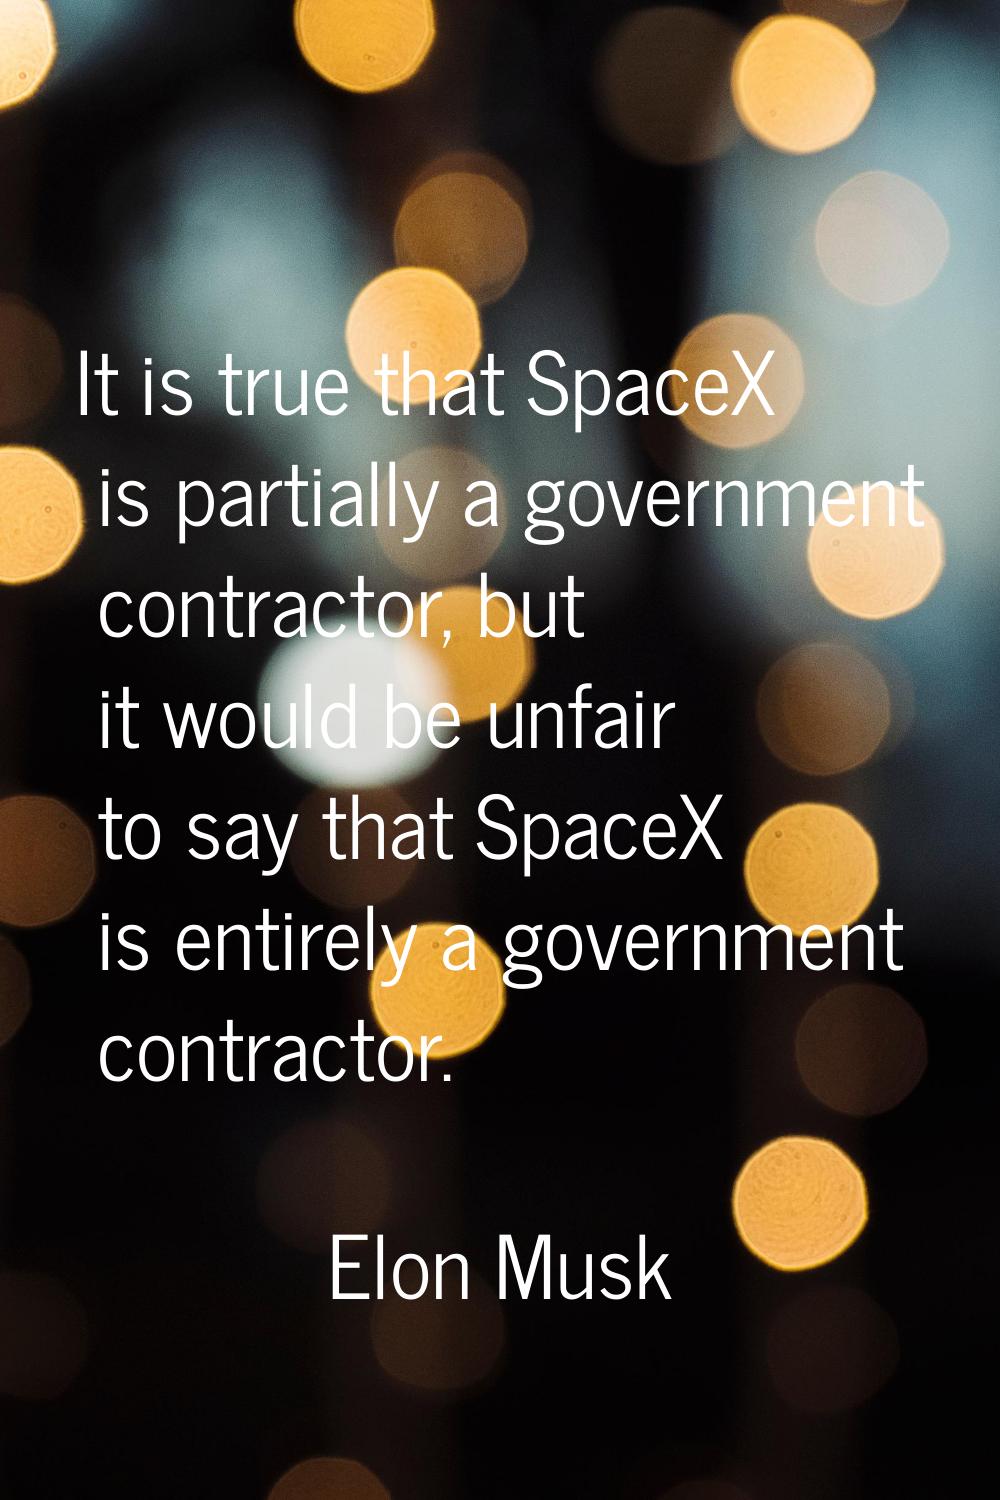 It is true that SpaceX is partially a government contractor, but it would be unfair to say that Spa